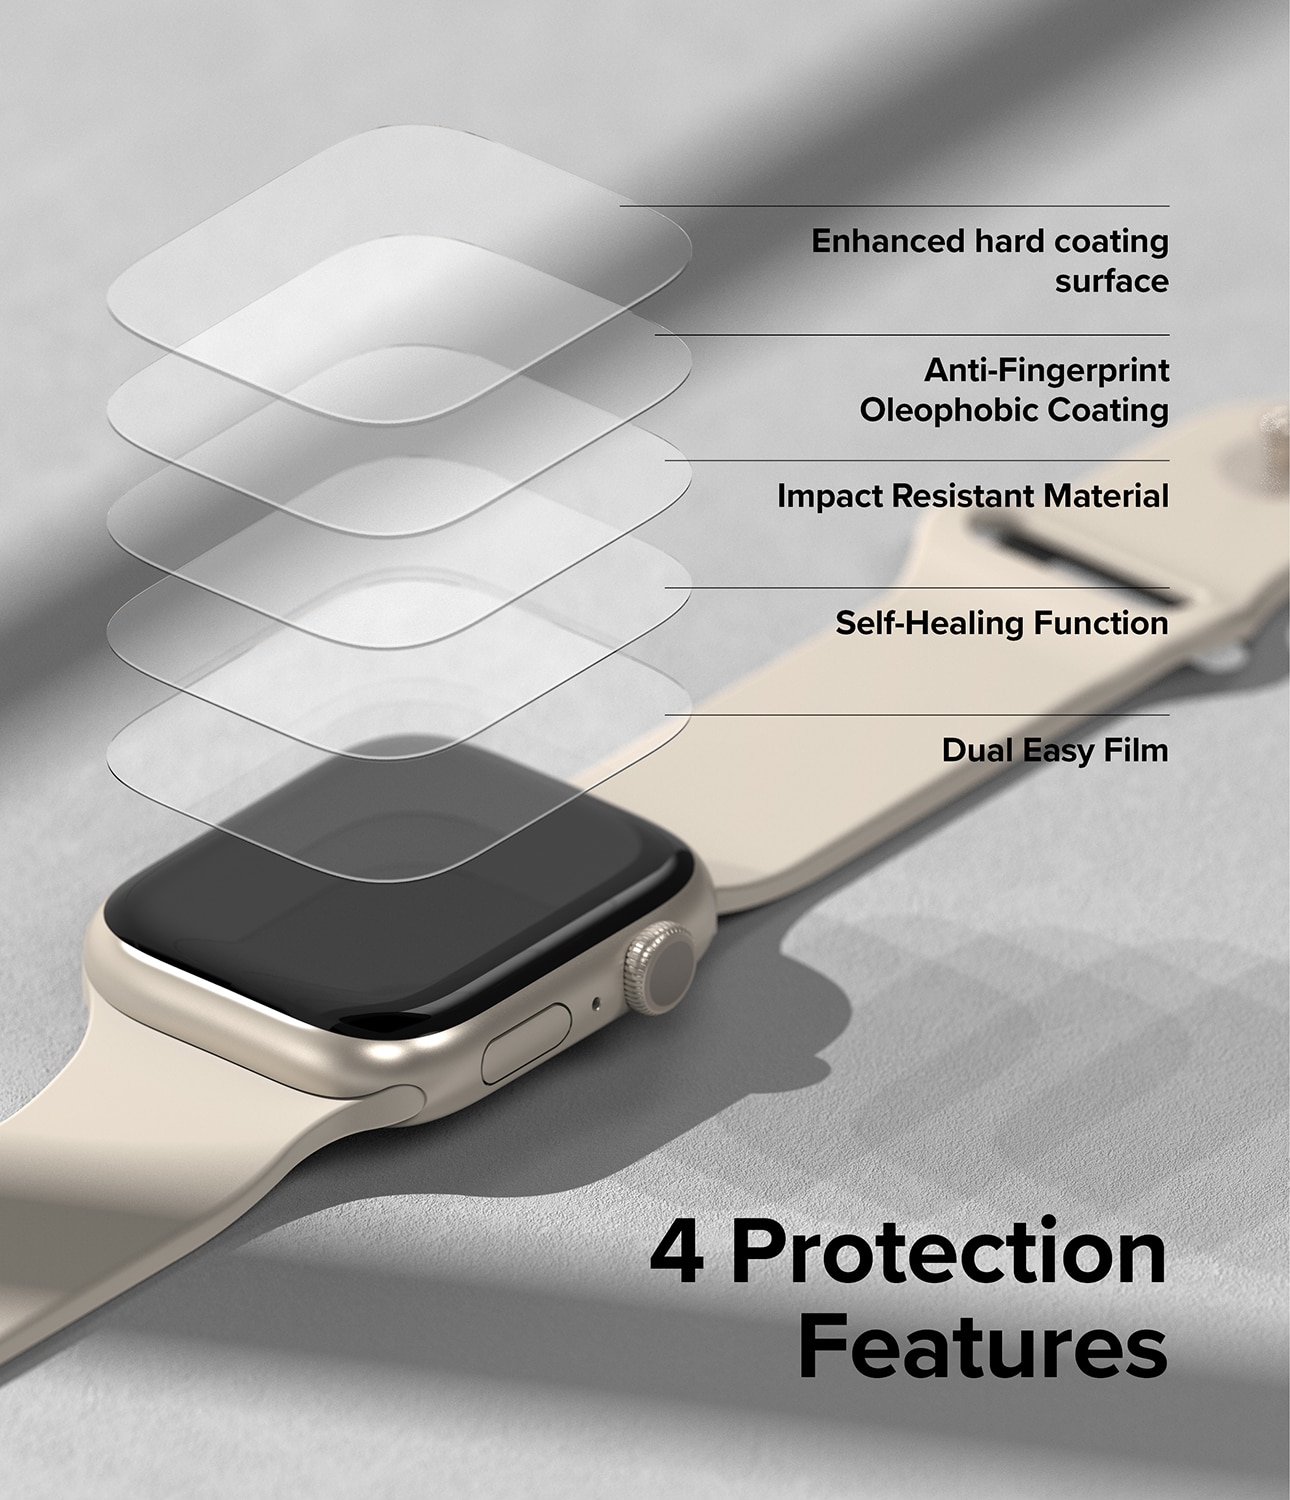 Apple Watch SE 44mm Dual Easy Screen Protector (3-pack)